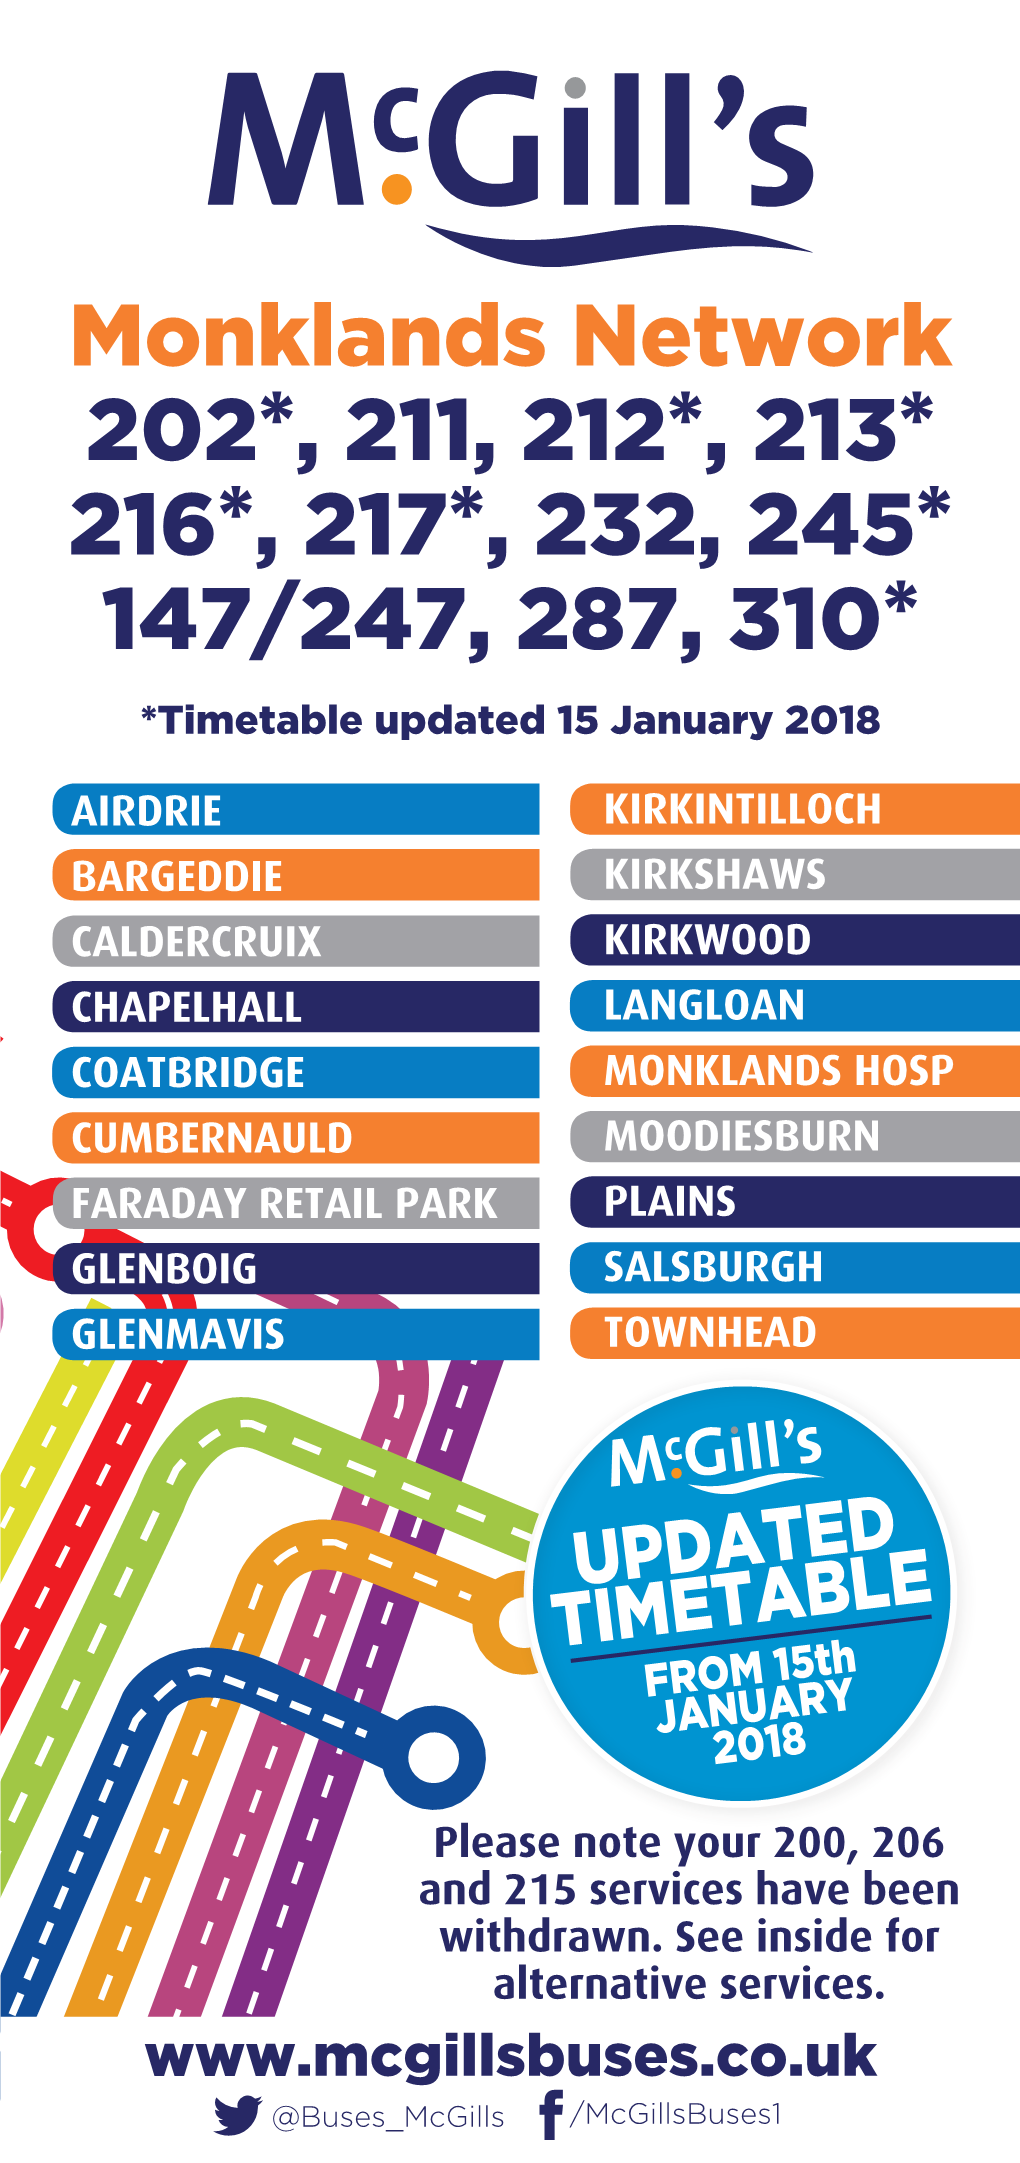 Monklands Network 202*, 211, 212*, 213* 216*, 217*, 232, 245* 147/247, 287, 310* *Timetable Updated 15 January 2018